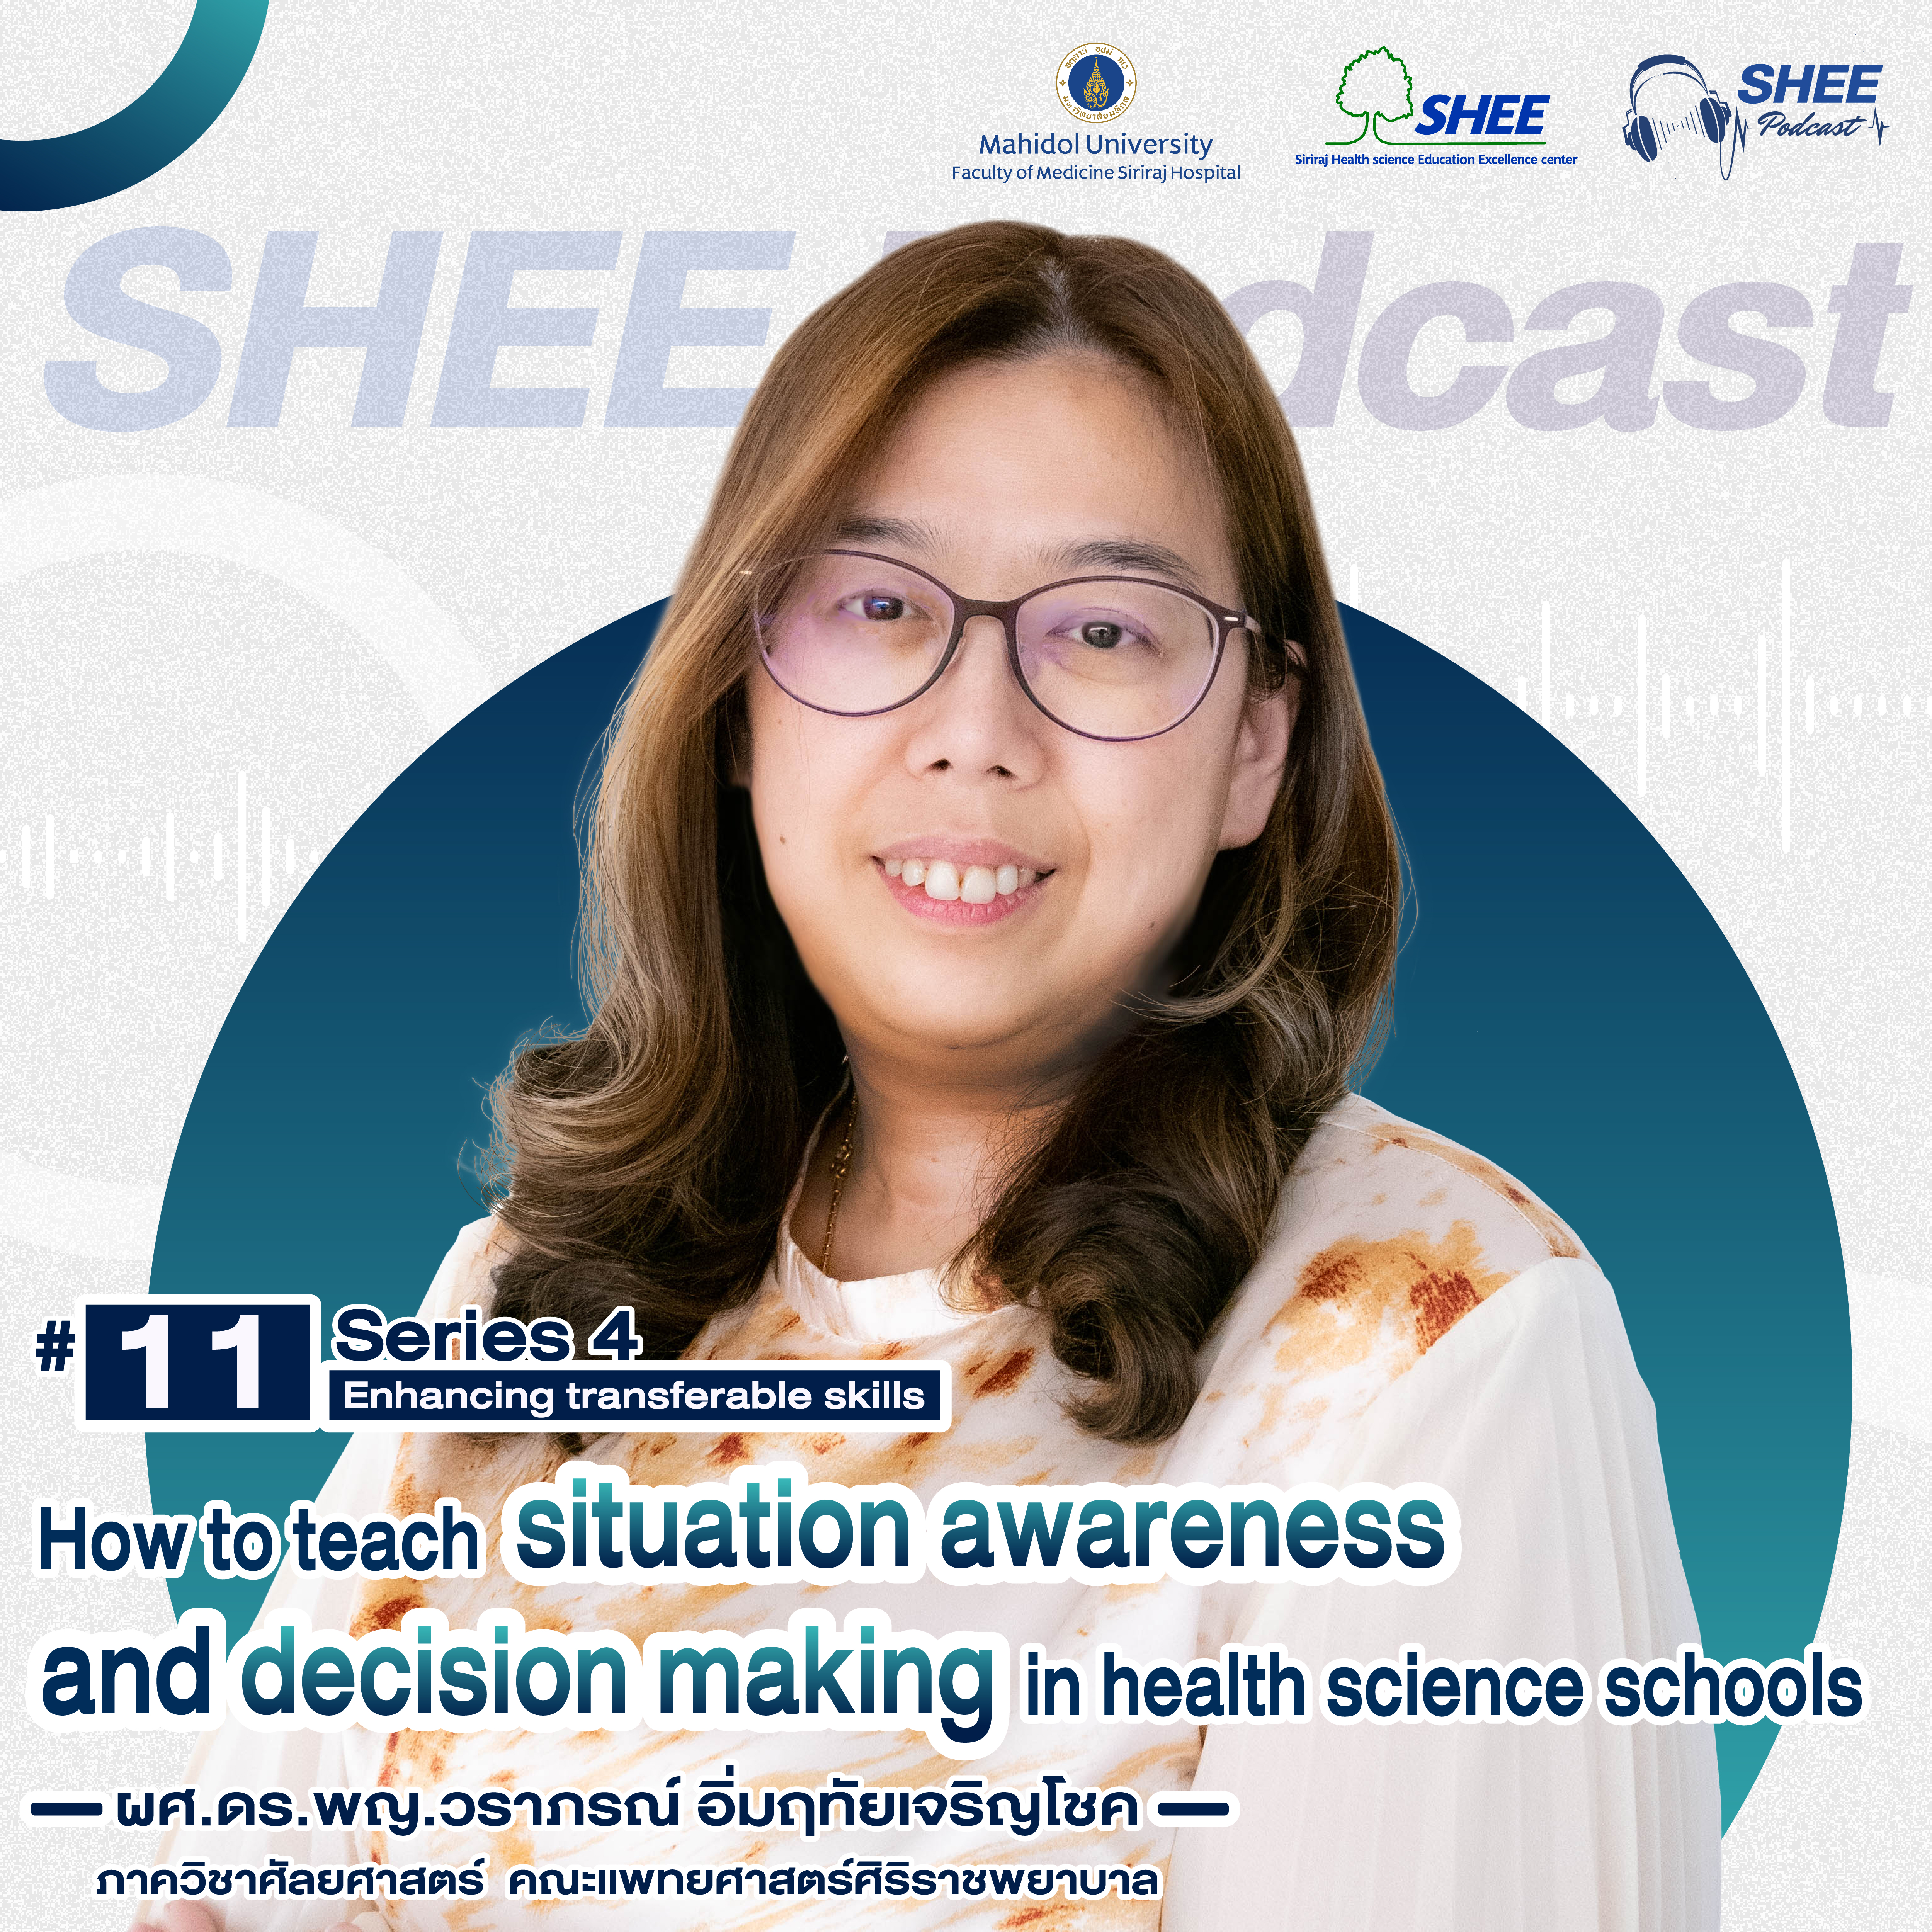 Episode 11 : How to teach situation awareness and decision making in health science schools